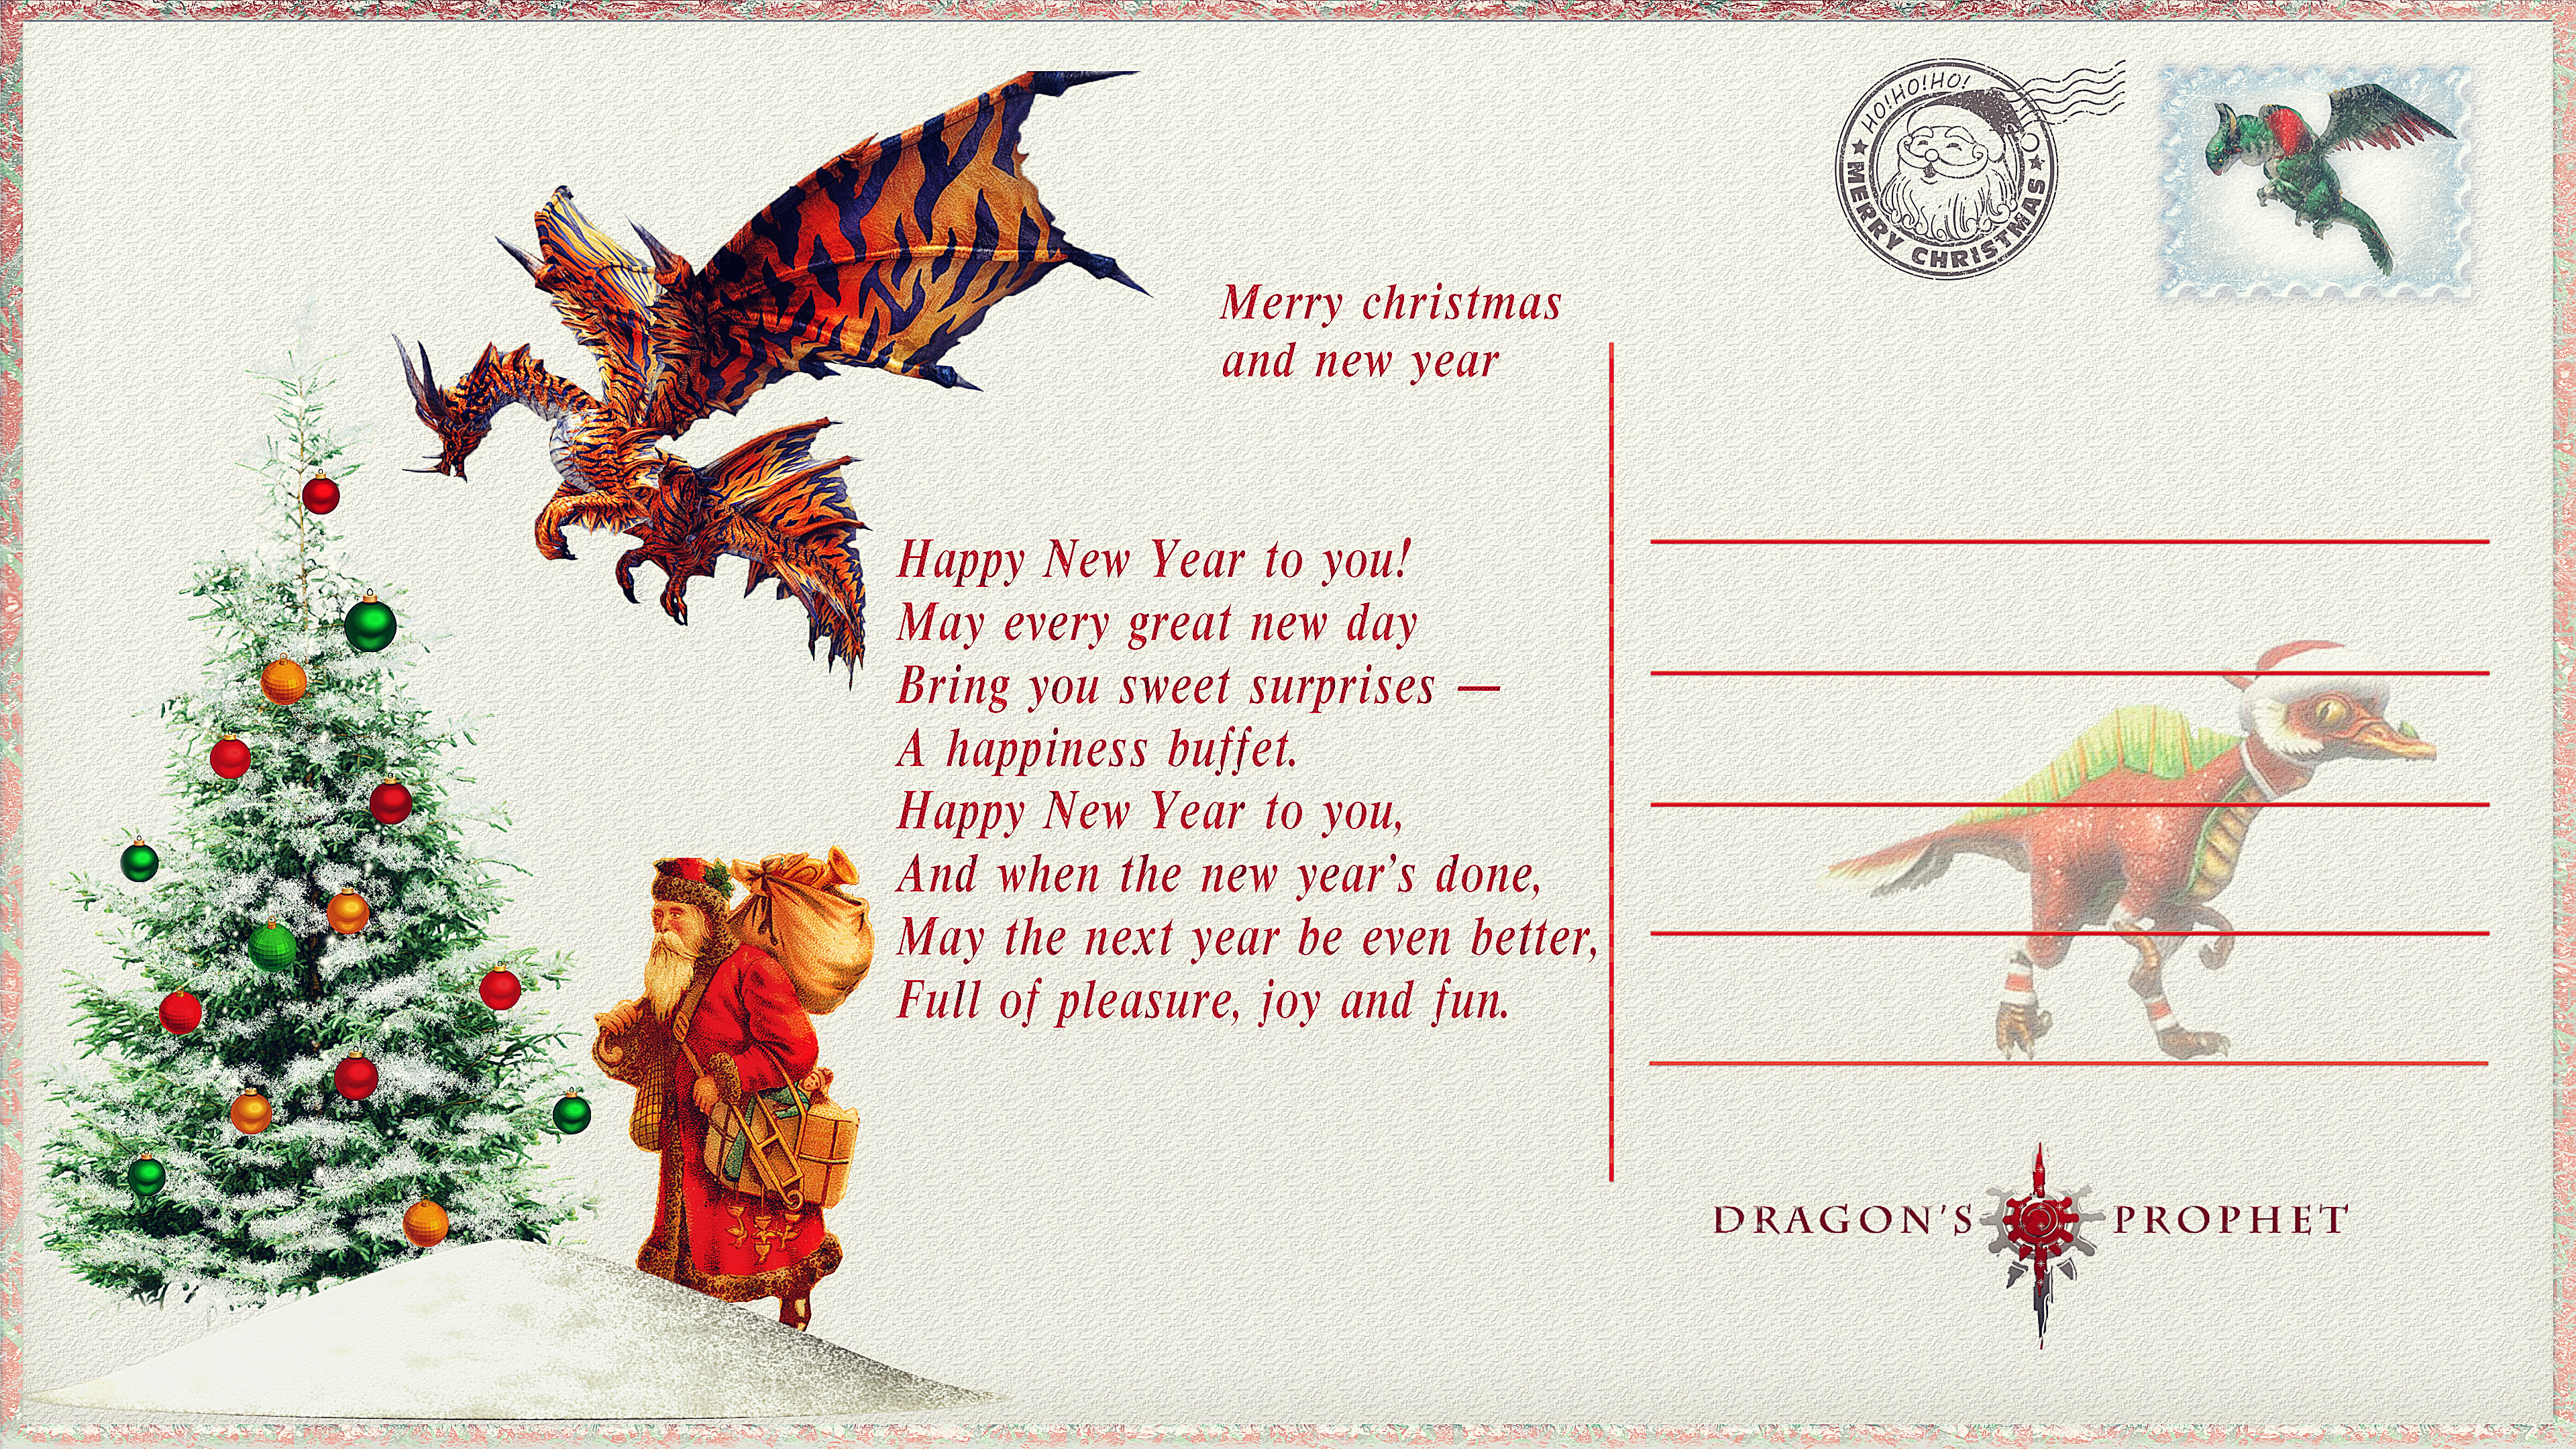 Greeting card for Christmas and new year